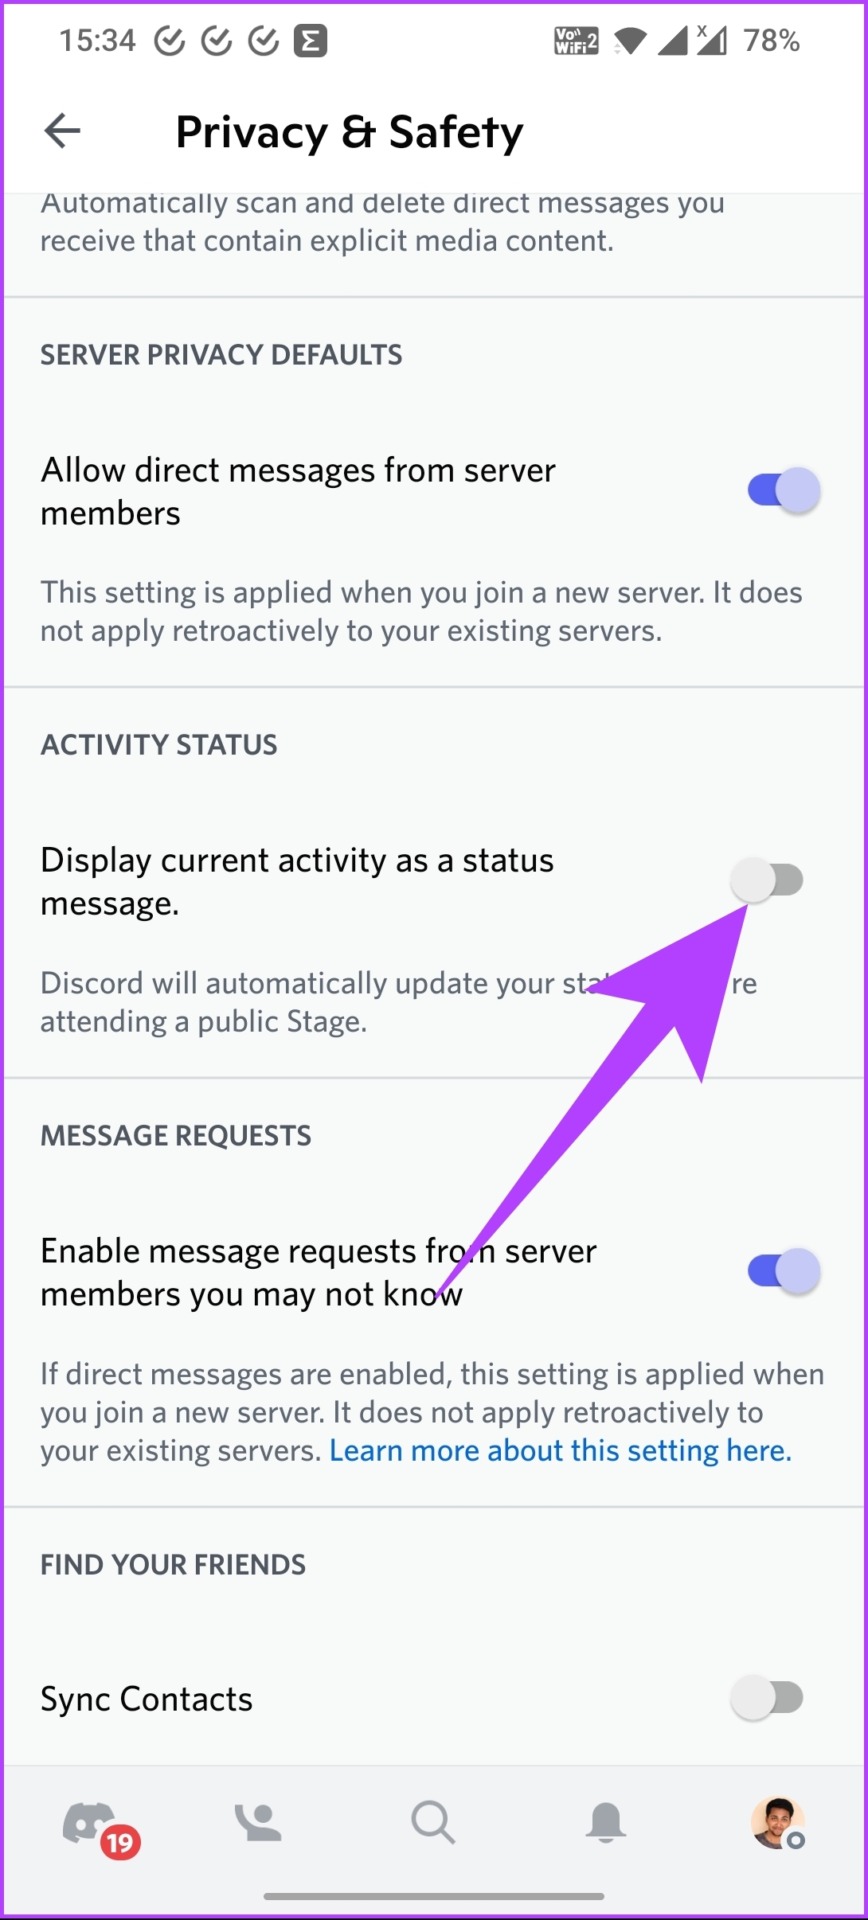 turn off the Display current activity as a status message